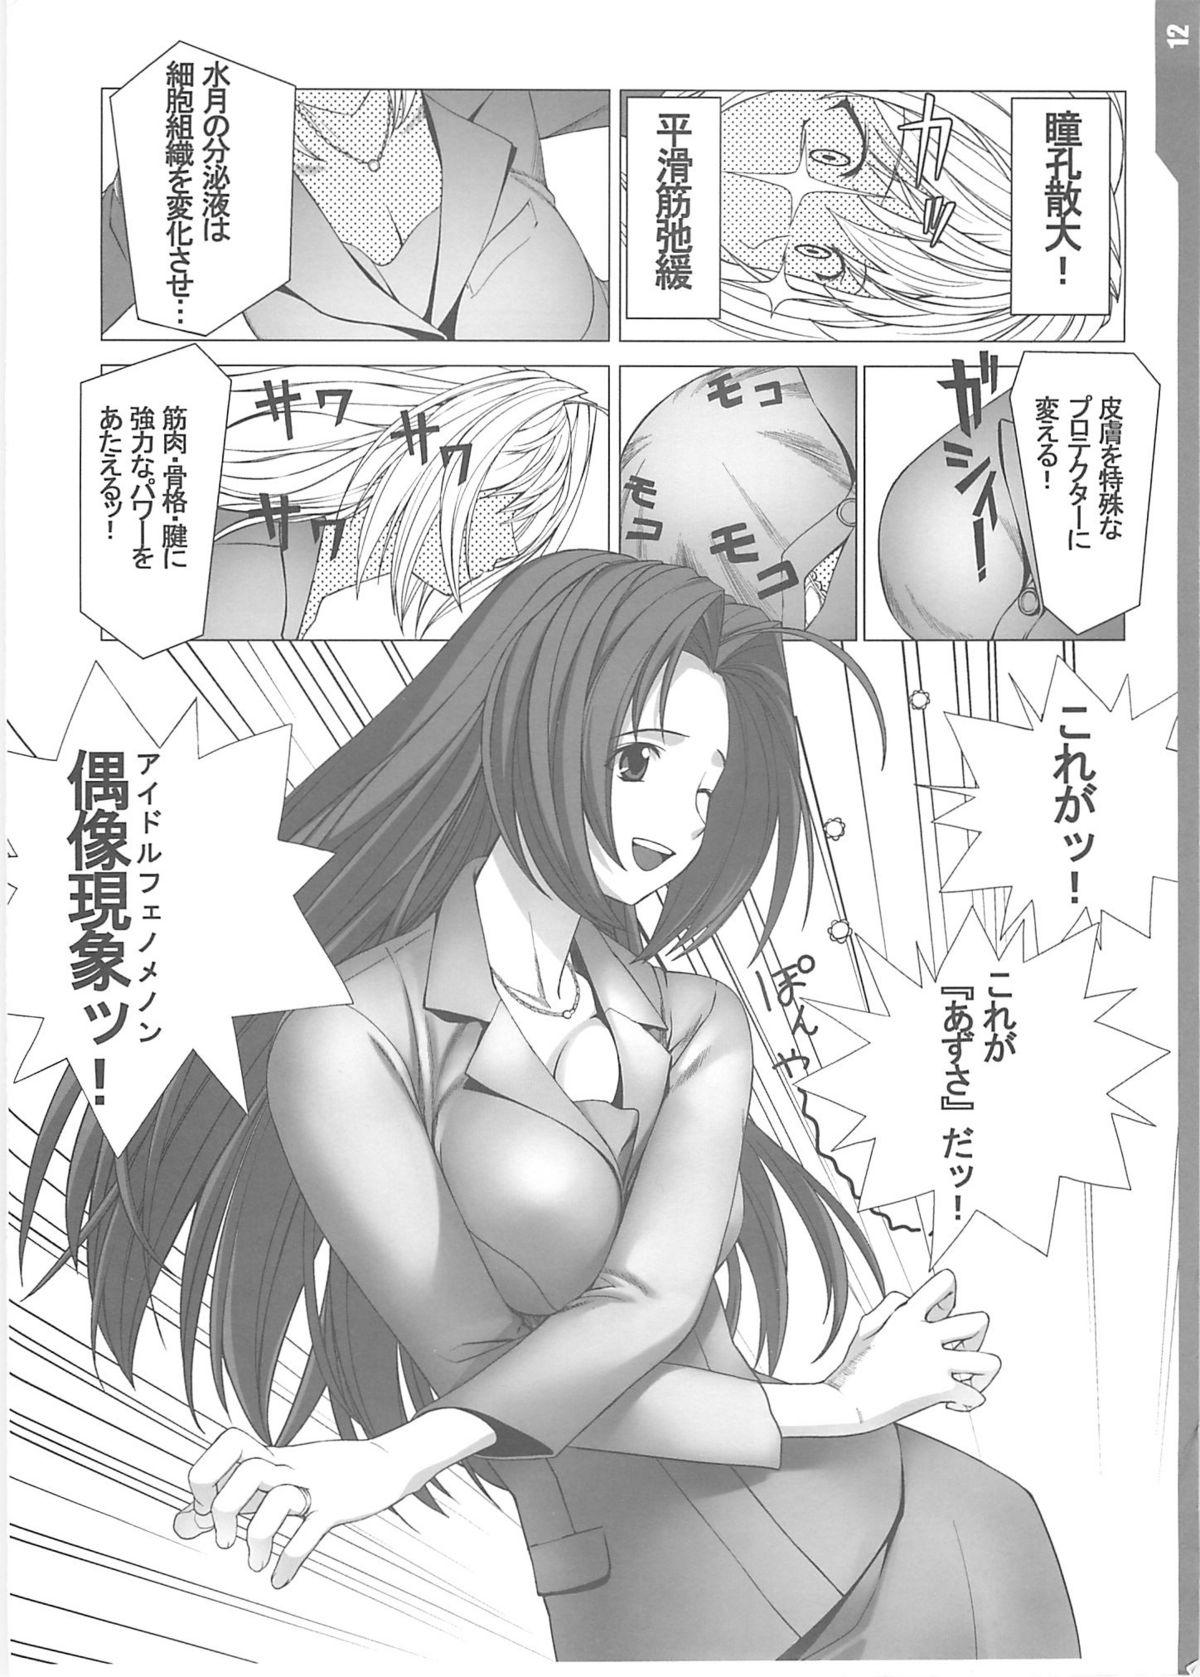 Shy Enikki Recycle 7 no Omake Hon - Beat Angel - The idolmaster Free Teenage Porn - Page 12